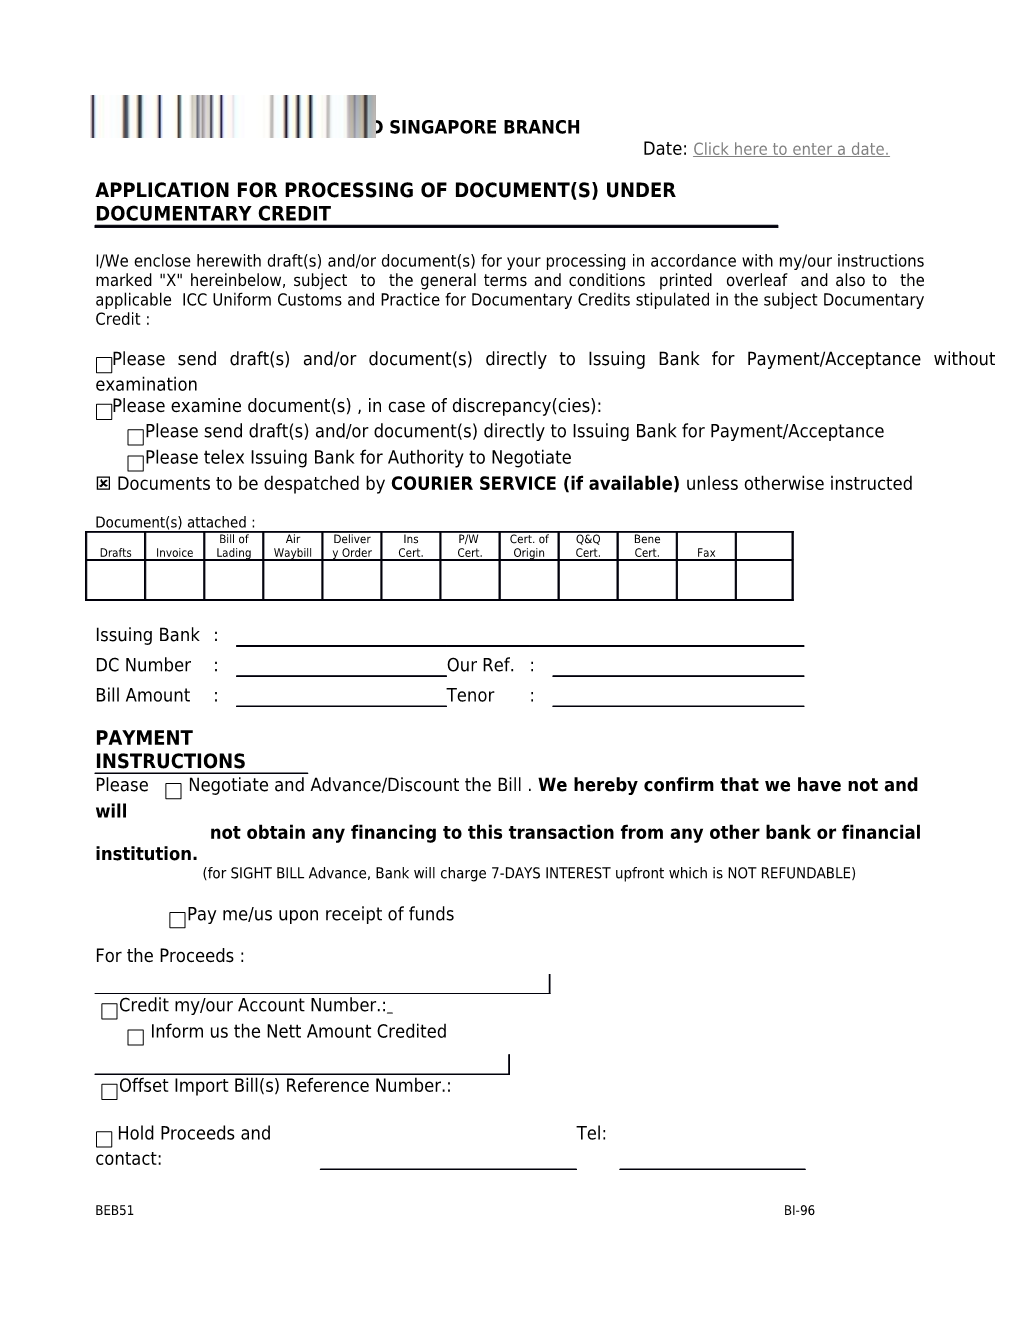 Application for Processing of Document(S) Under Documentary Credit